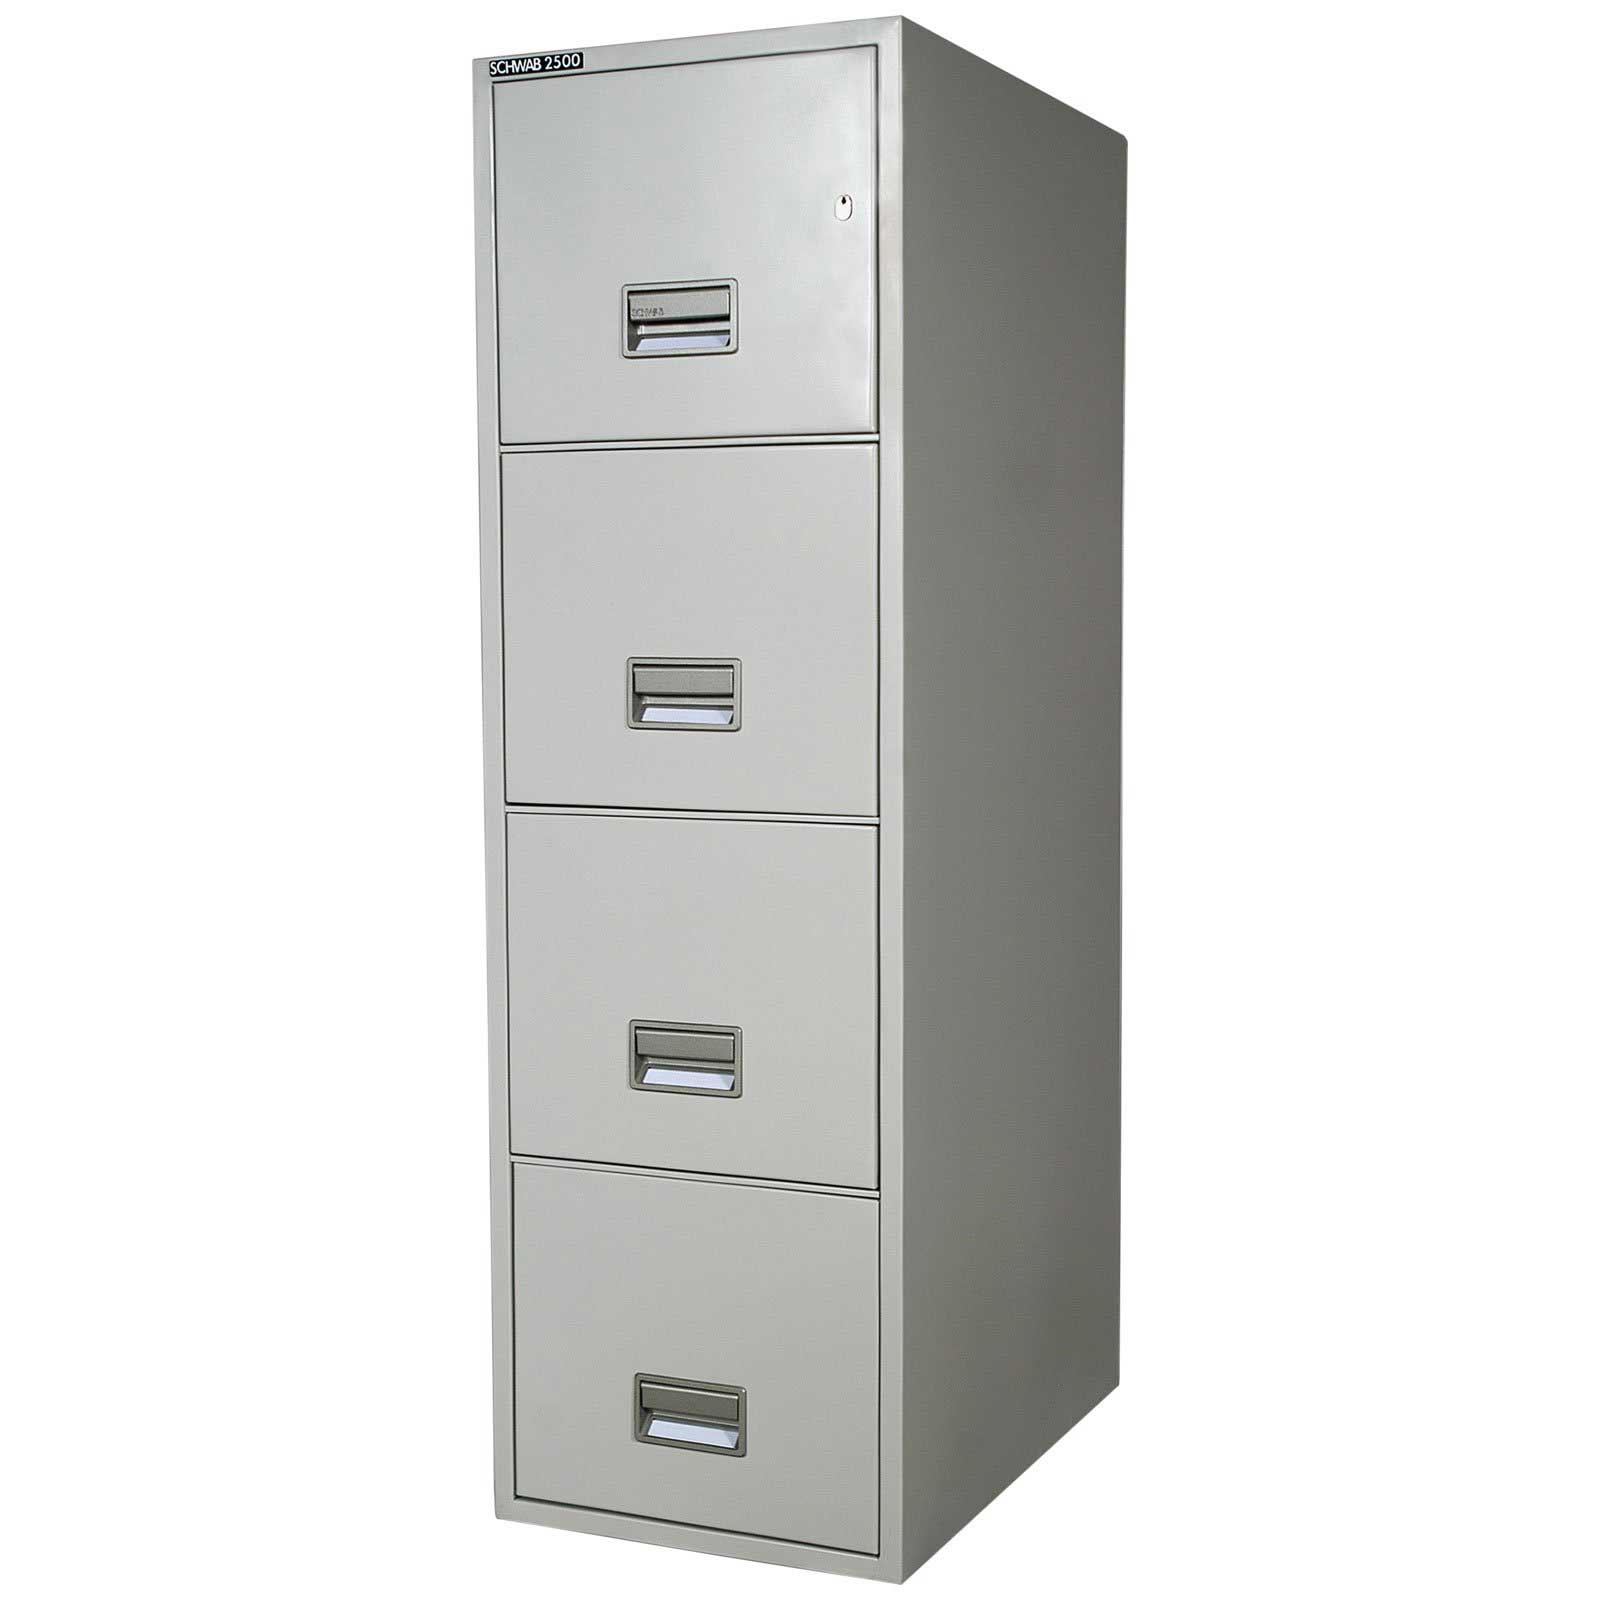 Picture 25 of Steel Cabinets For Office